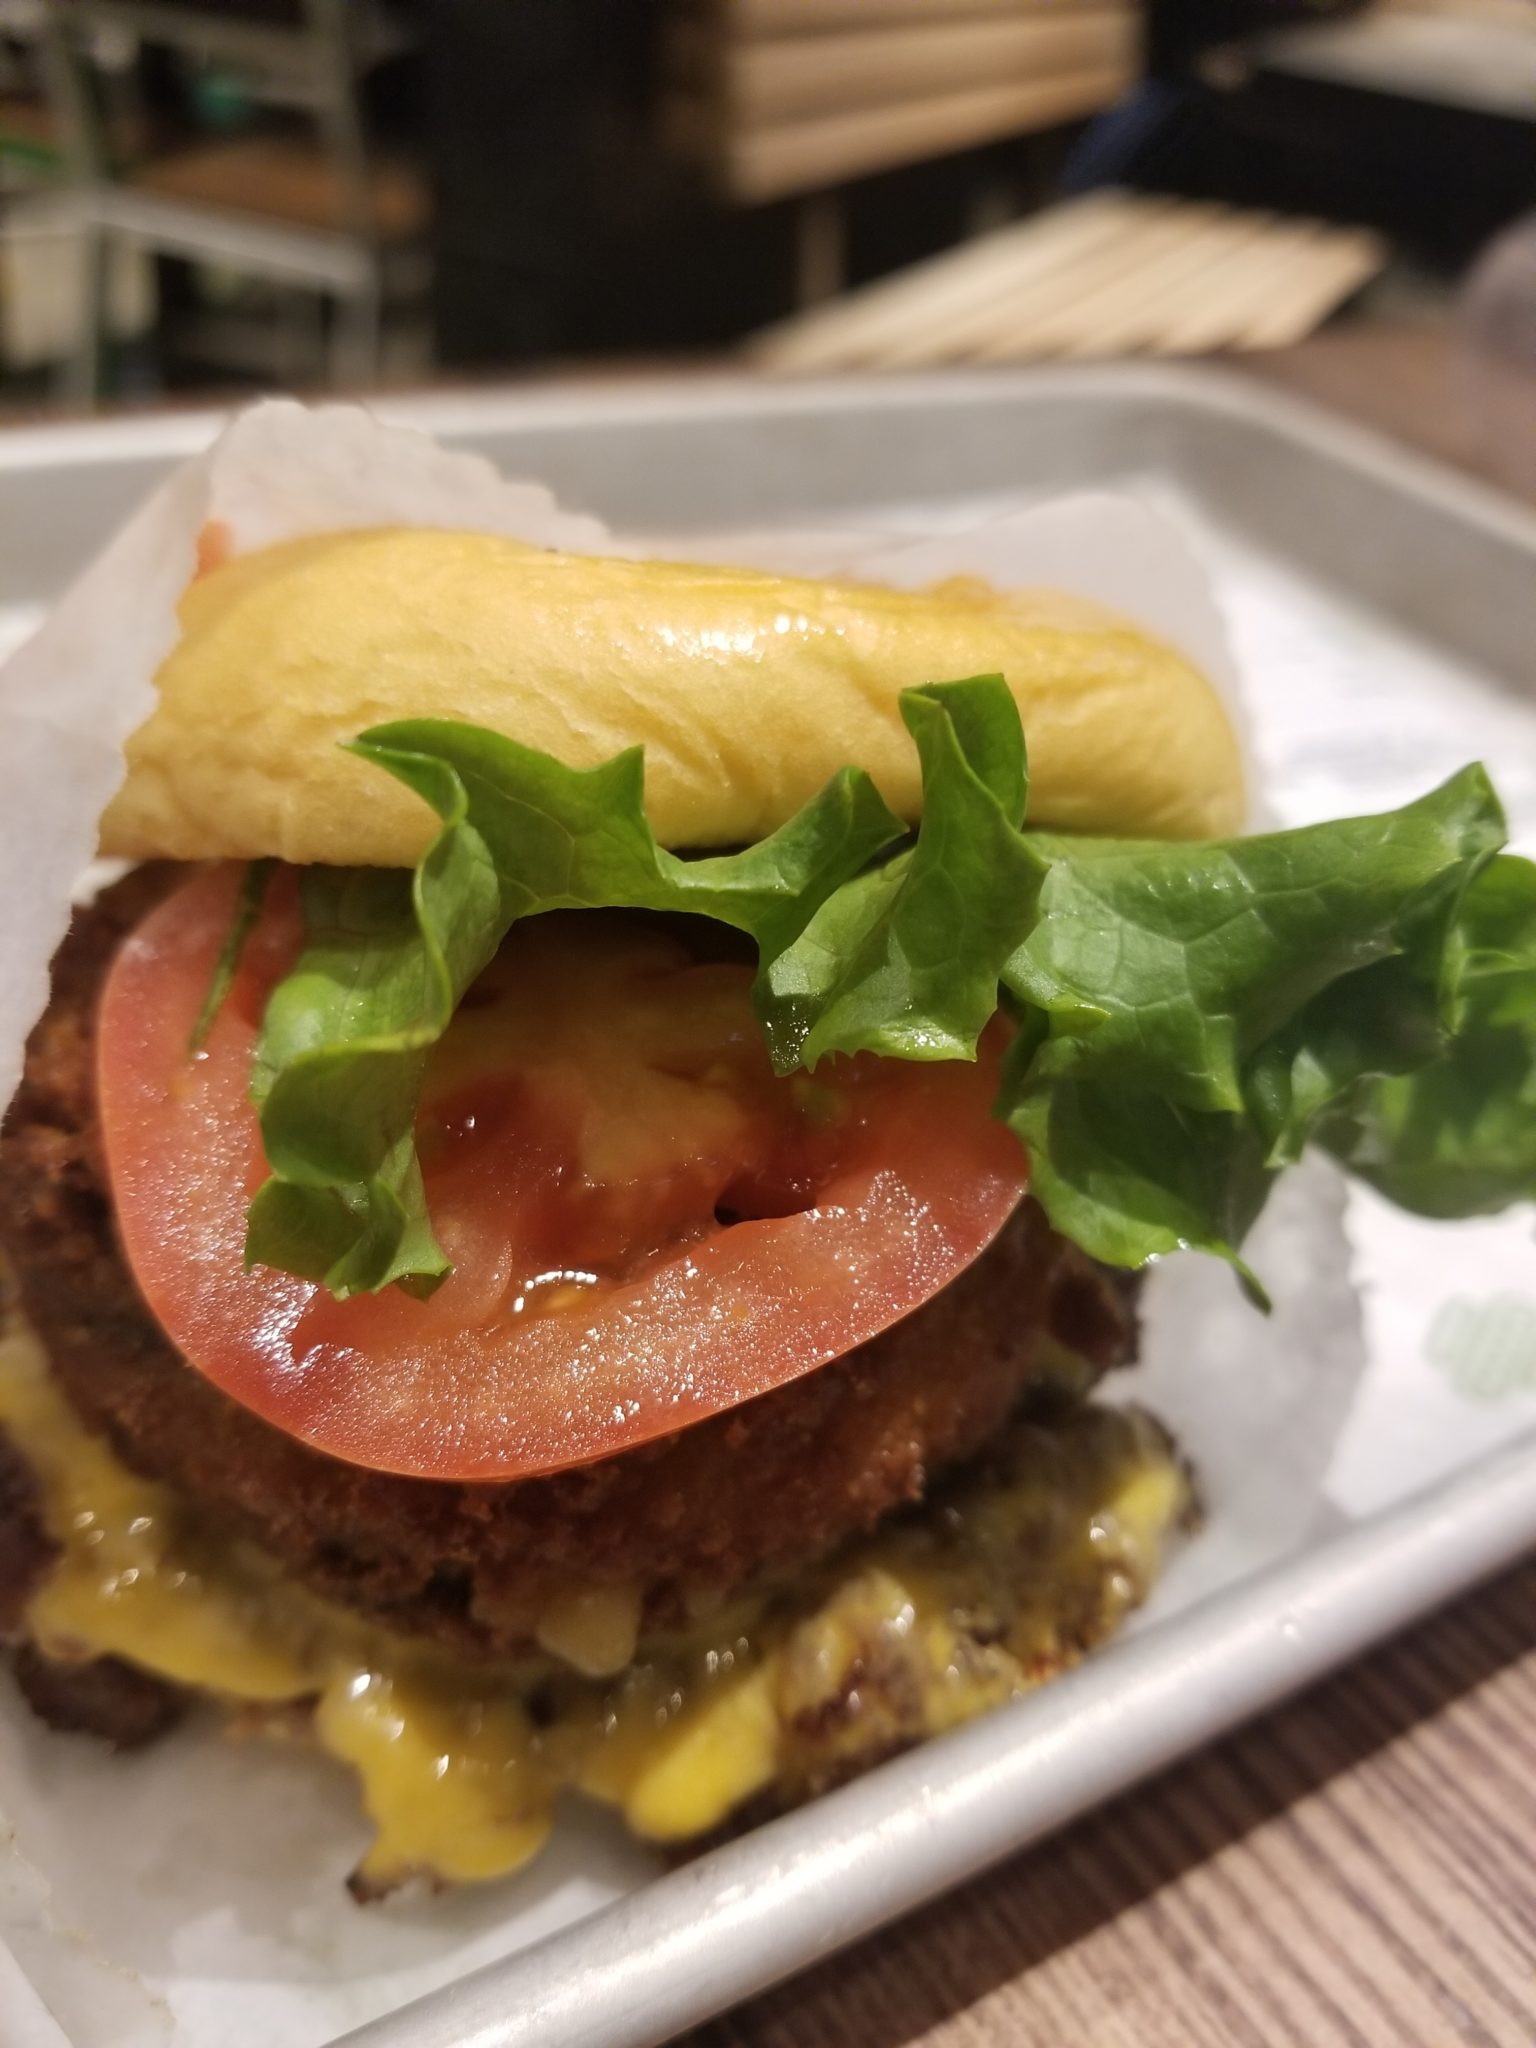 a burger with lettuce and tomato on a tray